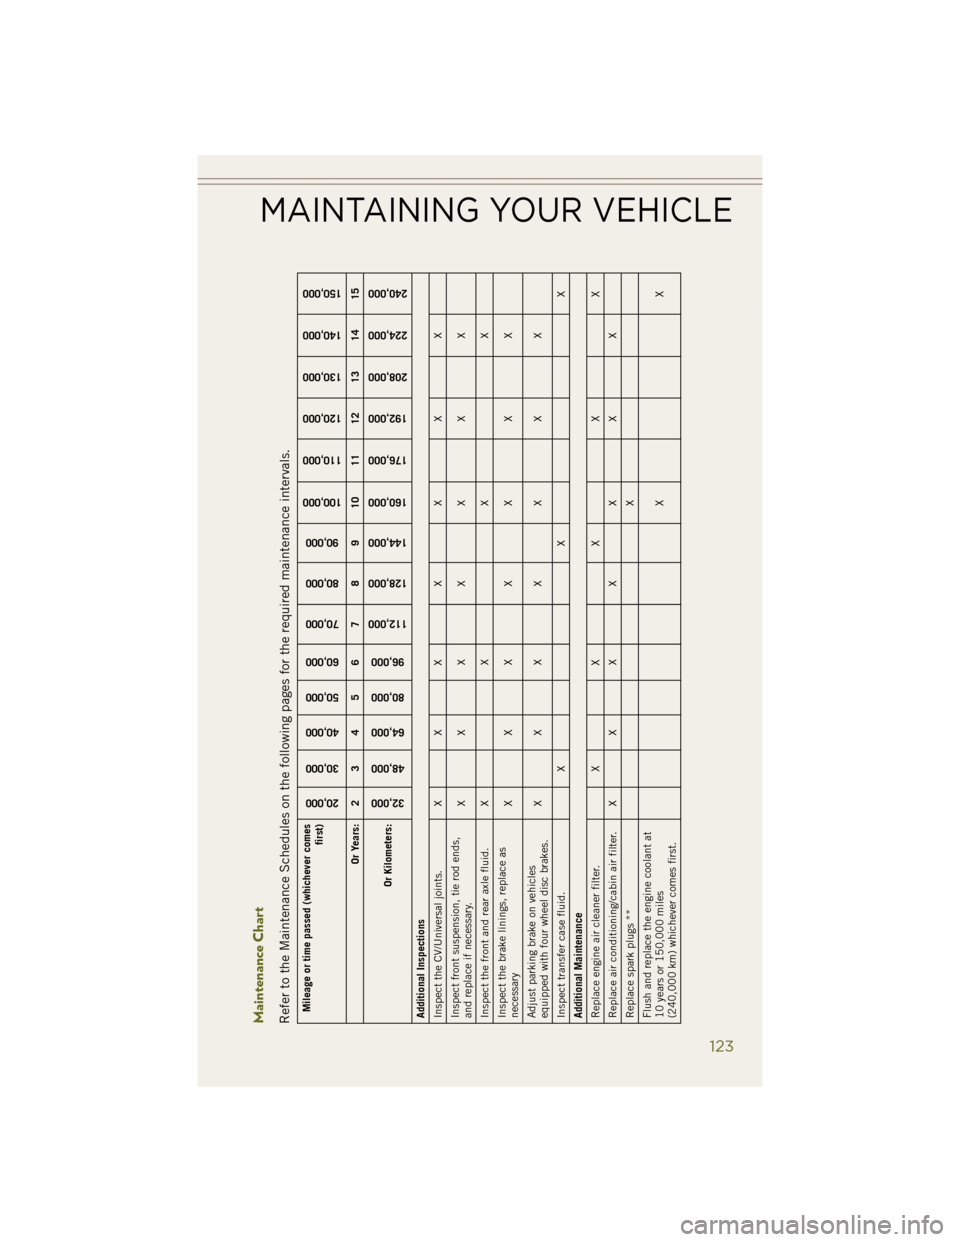 JEEP WRANGLER 2014 JK / 3.G User Guide Maintenance ChartRefer to the Maintenance Schedules on the following pages for the required maintenance intervals.Mileage or time passed (whichever comesfirst)
20,000
30,000
40,000
50,000
60,000
70,00